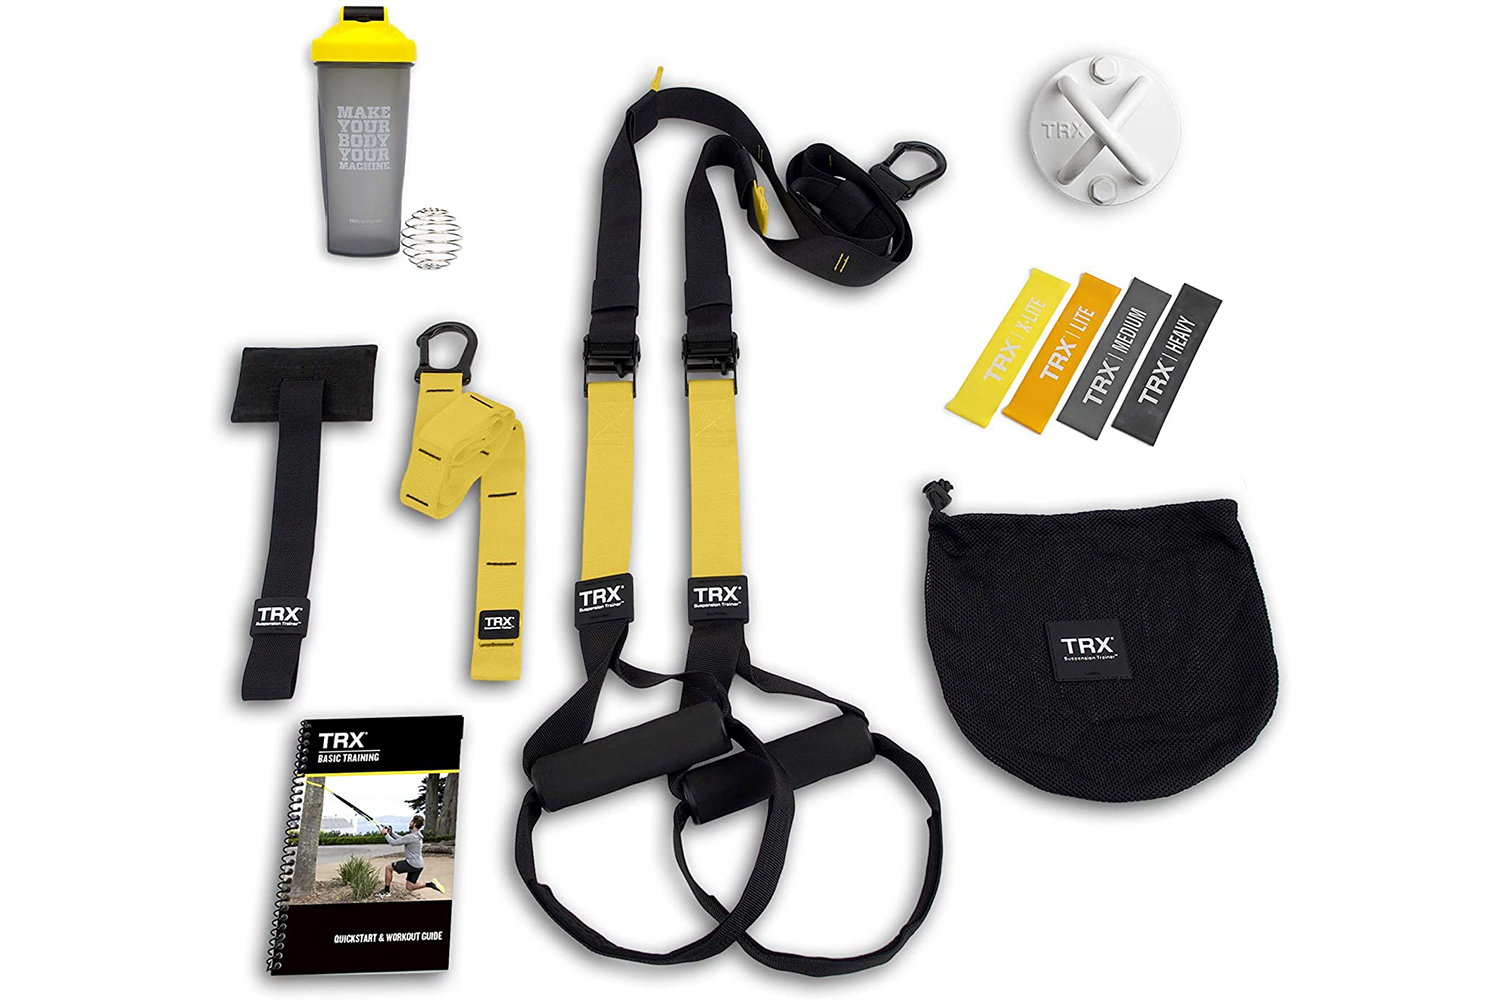 https://www.themanual.com/wp-content/uploads/sites/9/2021/06/trx-all-in-one-home-gym-exercise-bands.jpg?fit=800%2C800&p=1